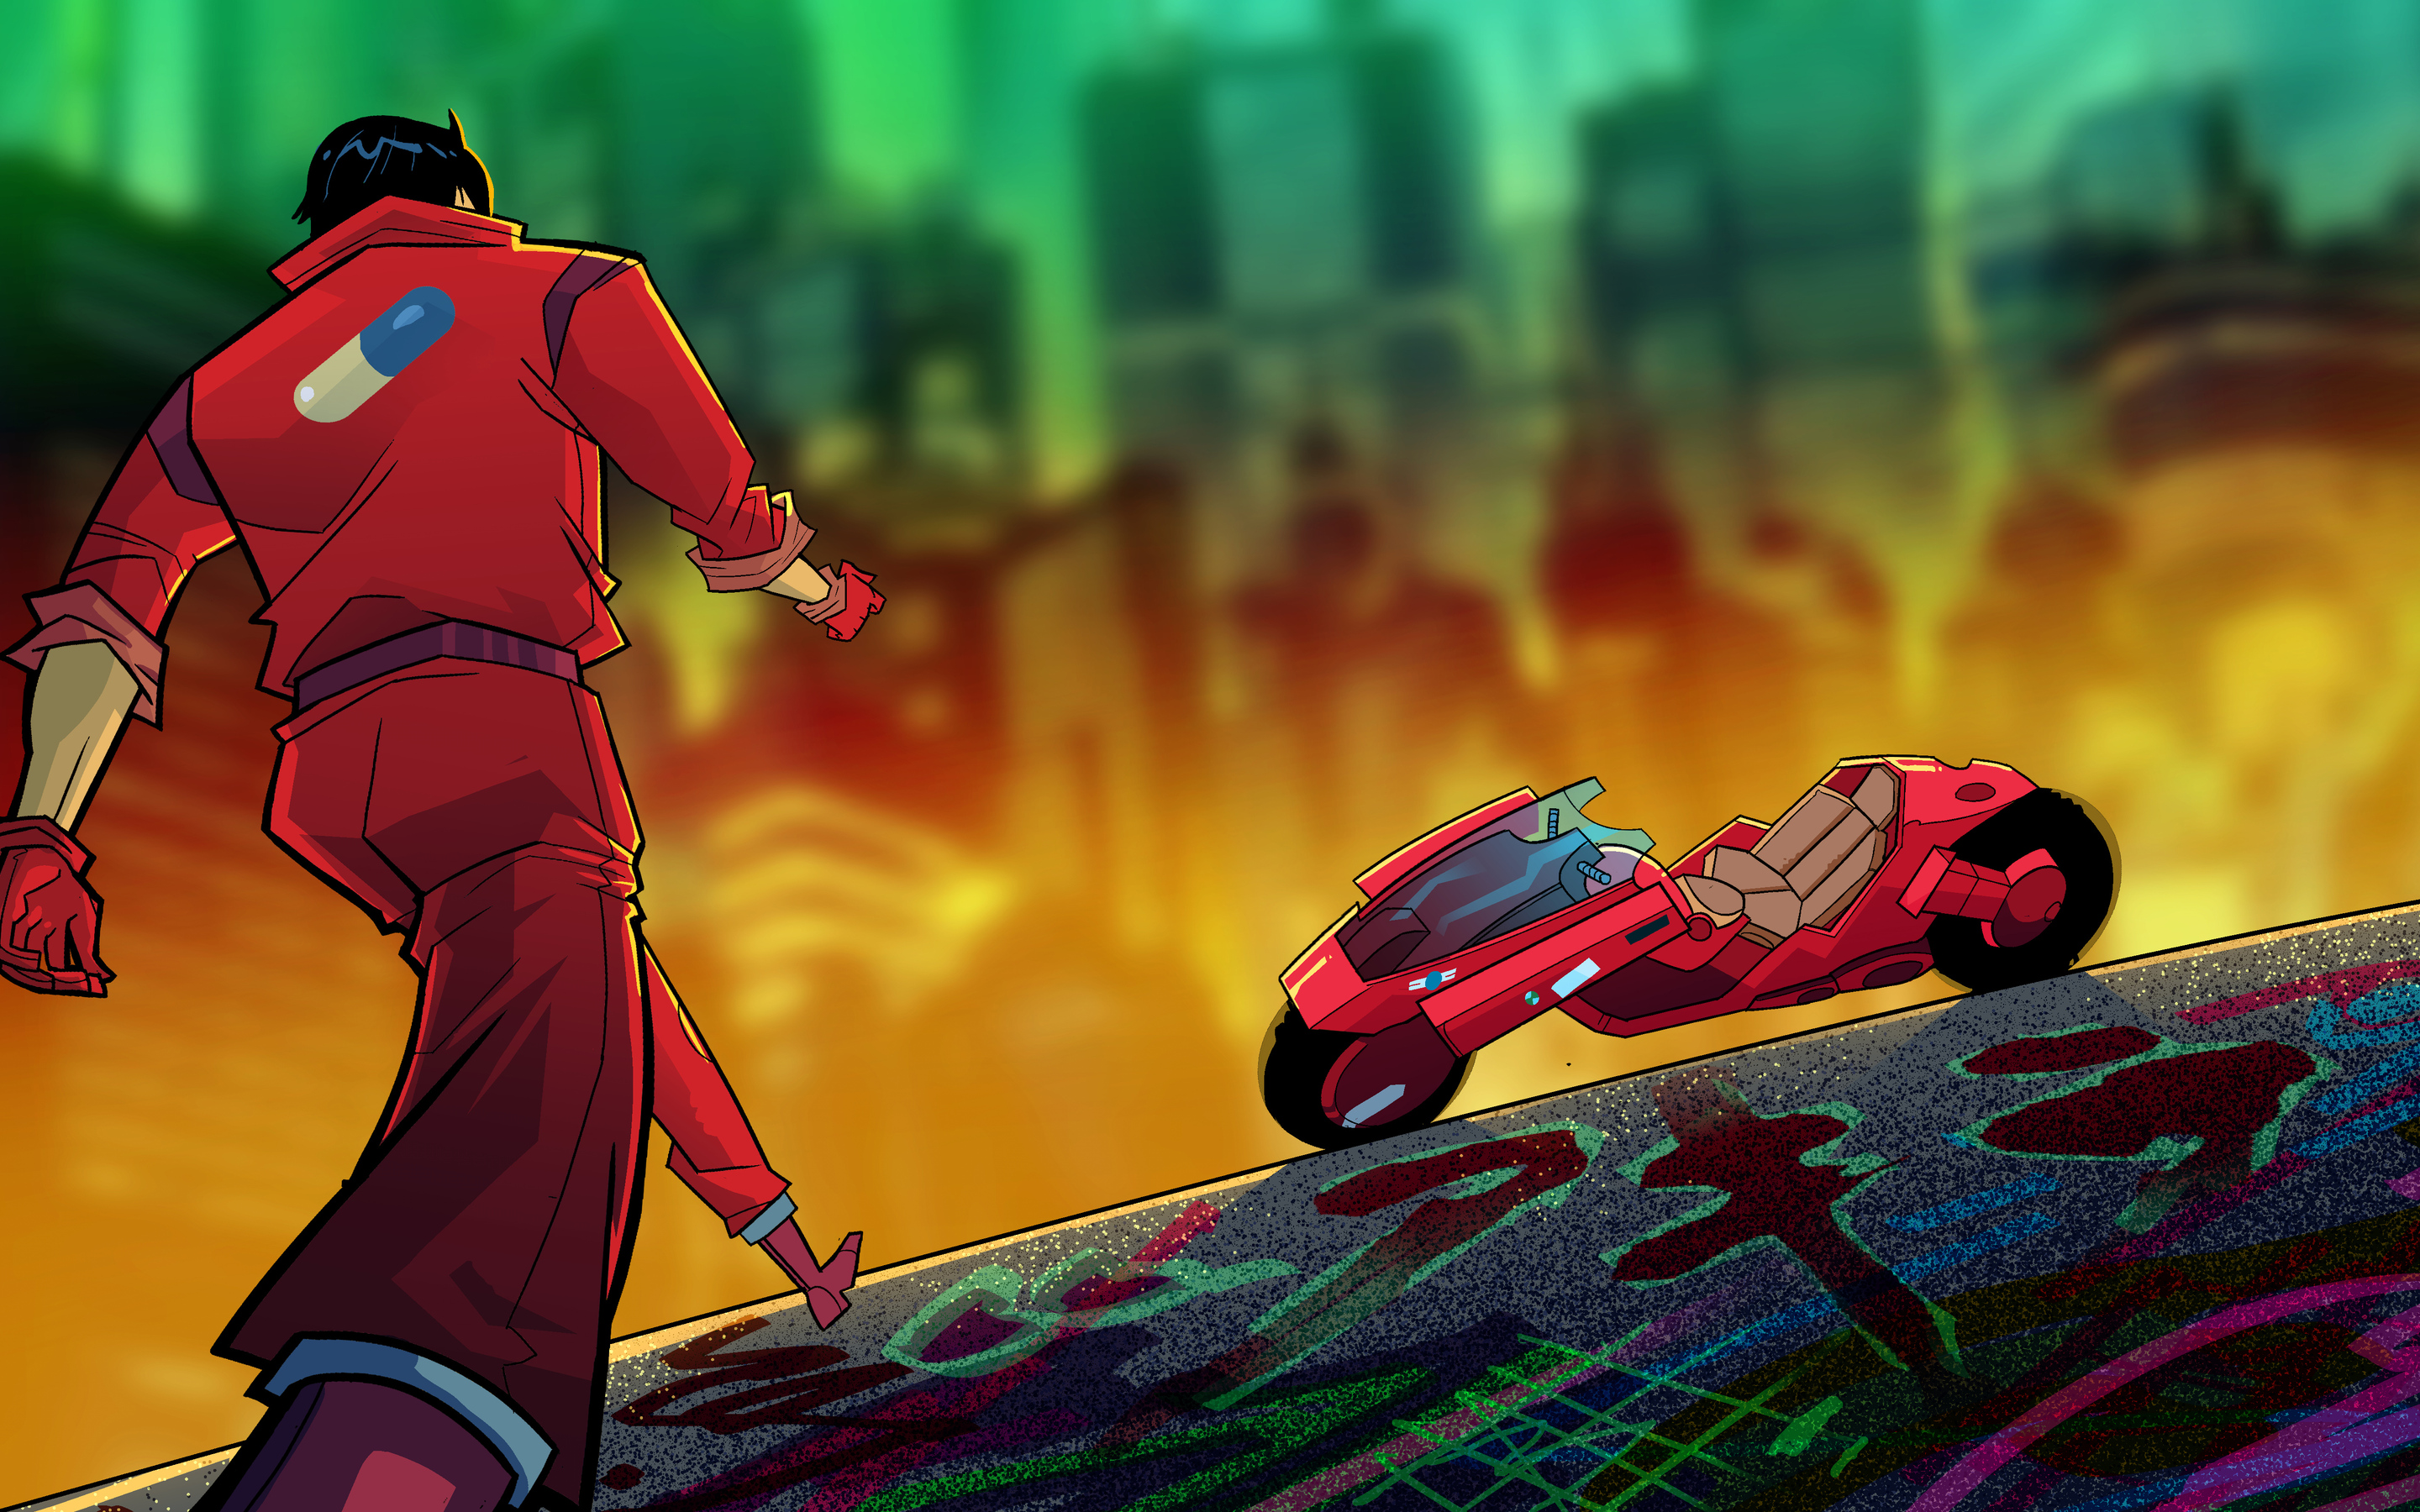 x1800 Akira 19 4k Macbook Pro Retina Hd 4k Wallpapers Images Backgrounds Photos And Pictures